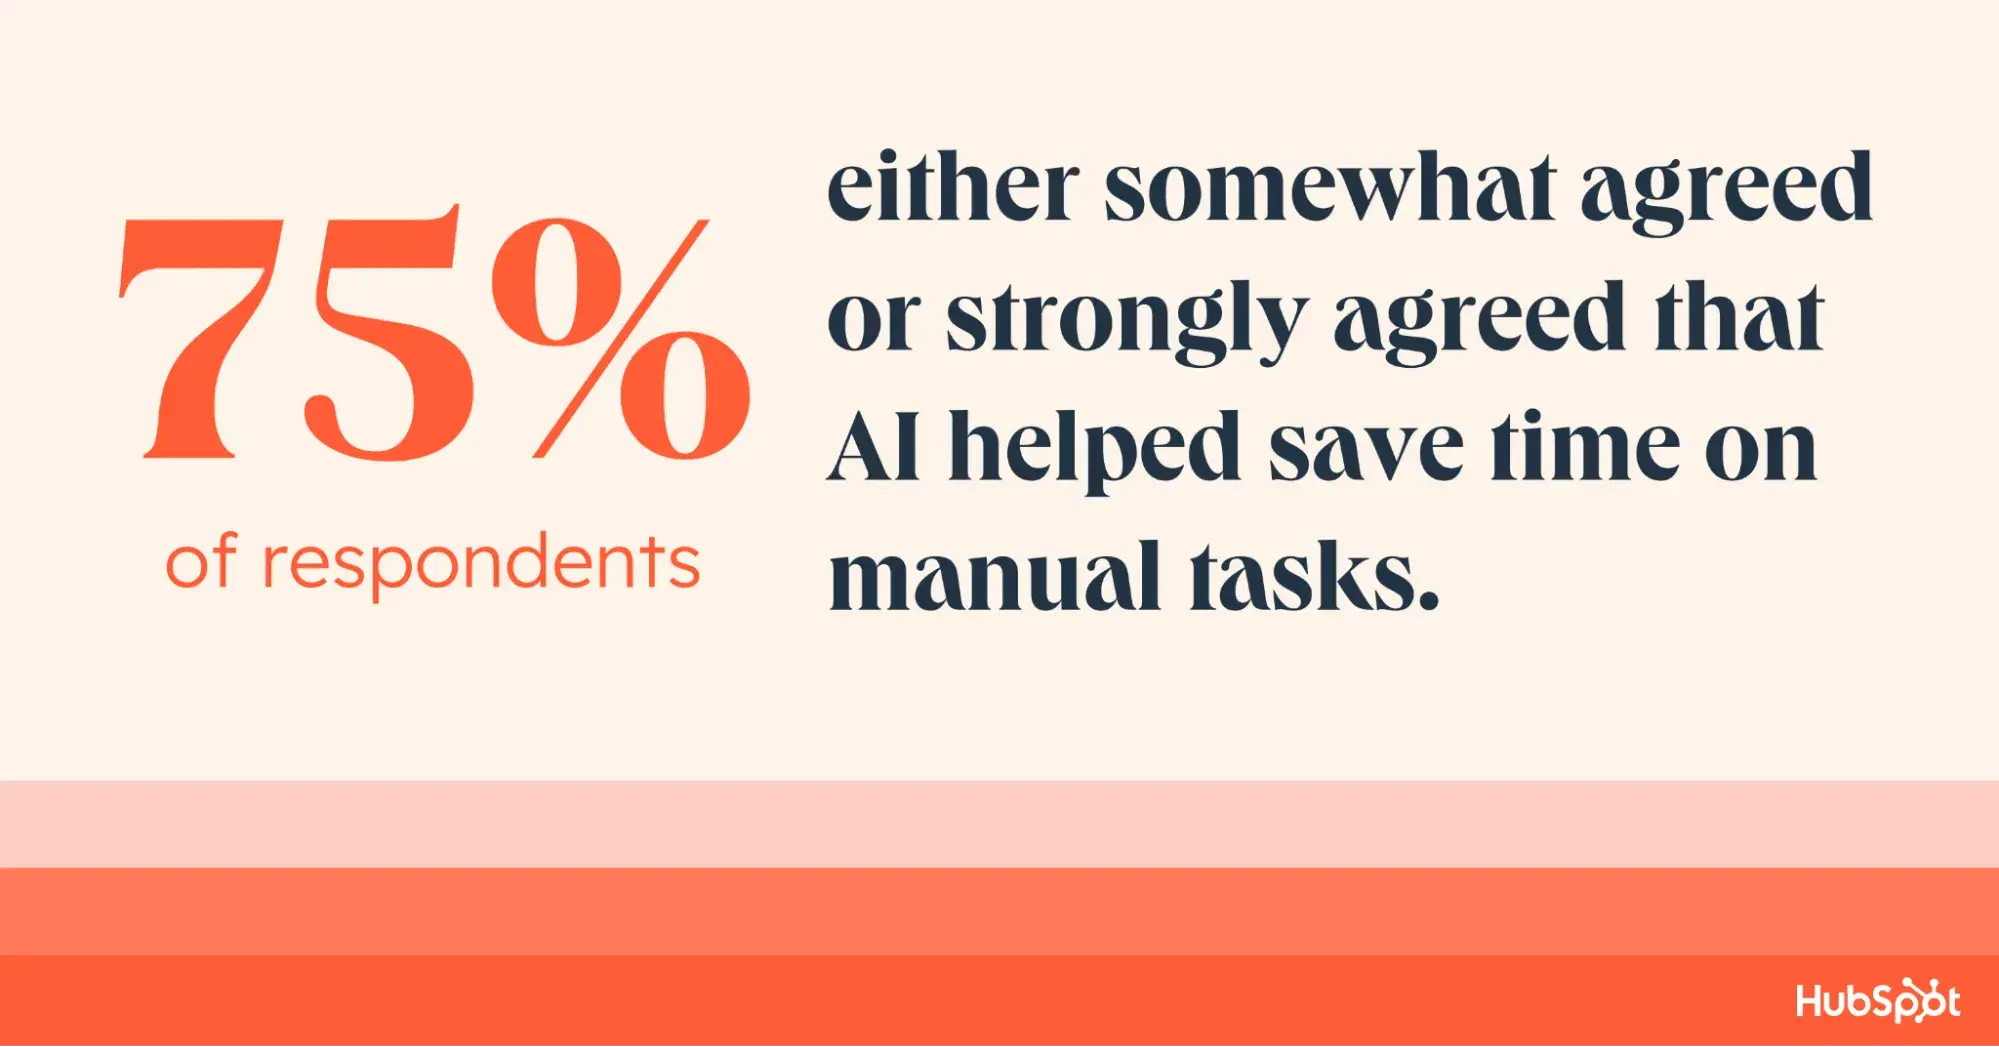 Infographic showing 75% of respondents either somewhat agreed or strongly agreed that AI helped save time on manual tasks